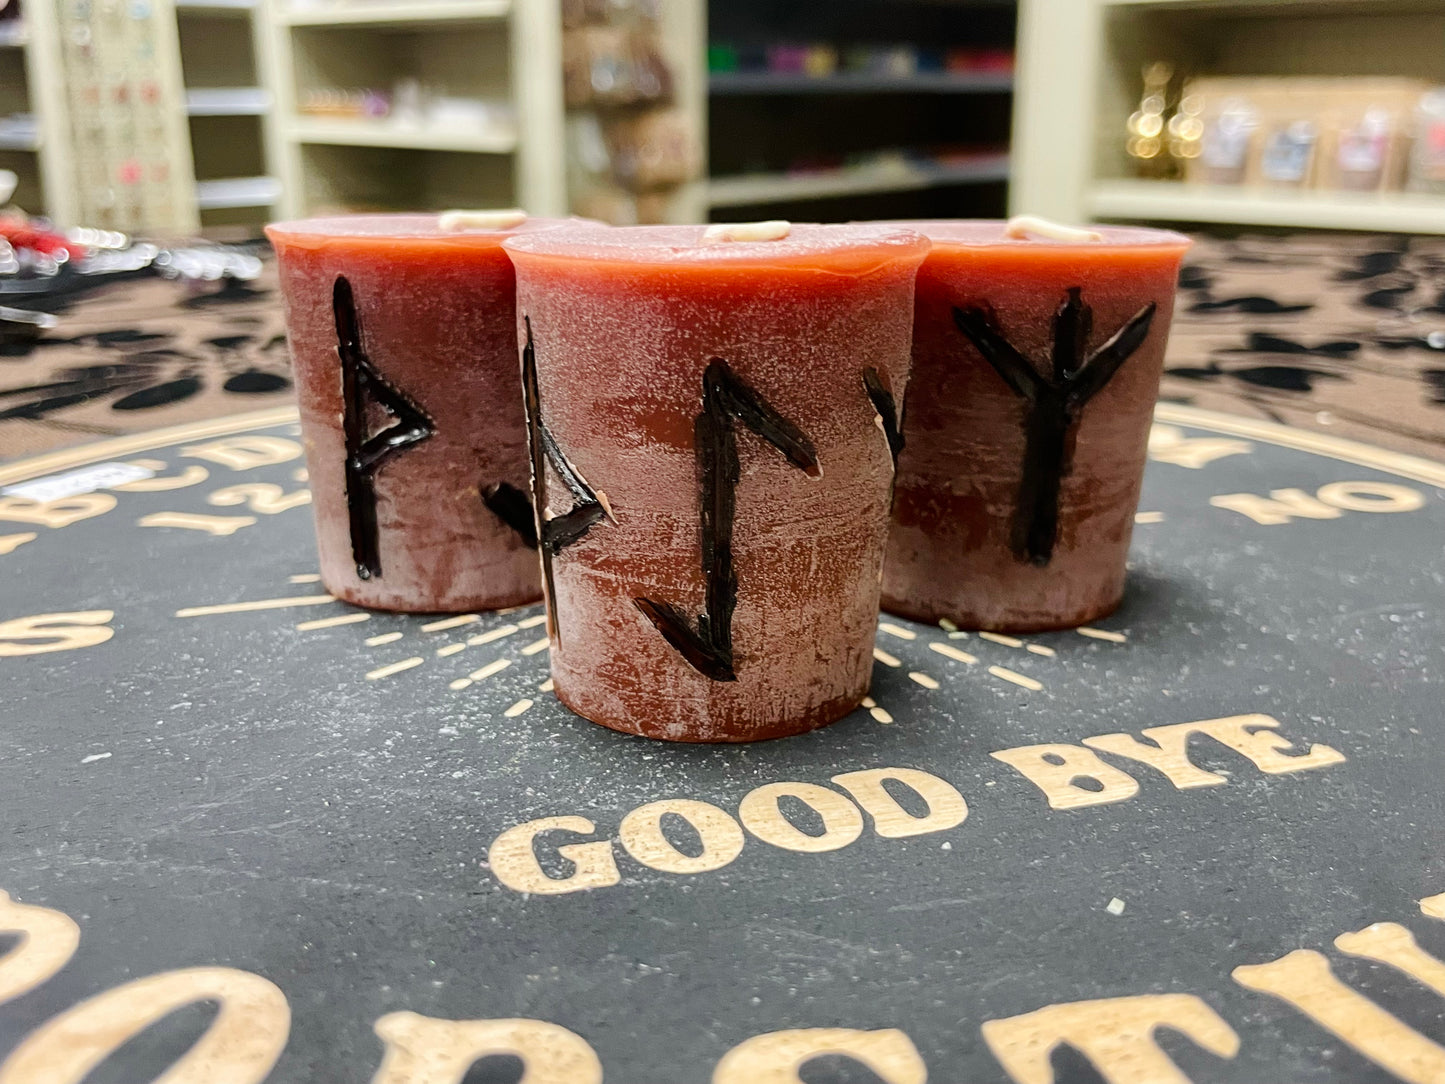 Drive Away Evil Protection Runes Spell Candle Votive, Brown Beeswax Candle, Clove Scent